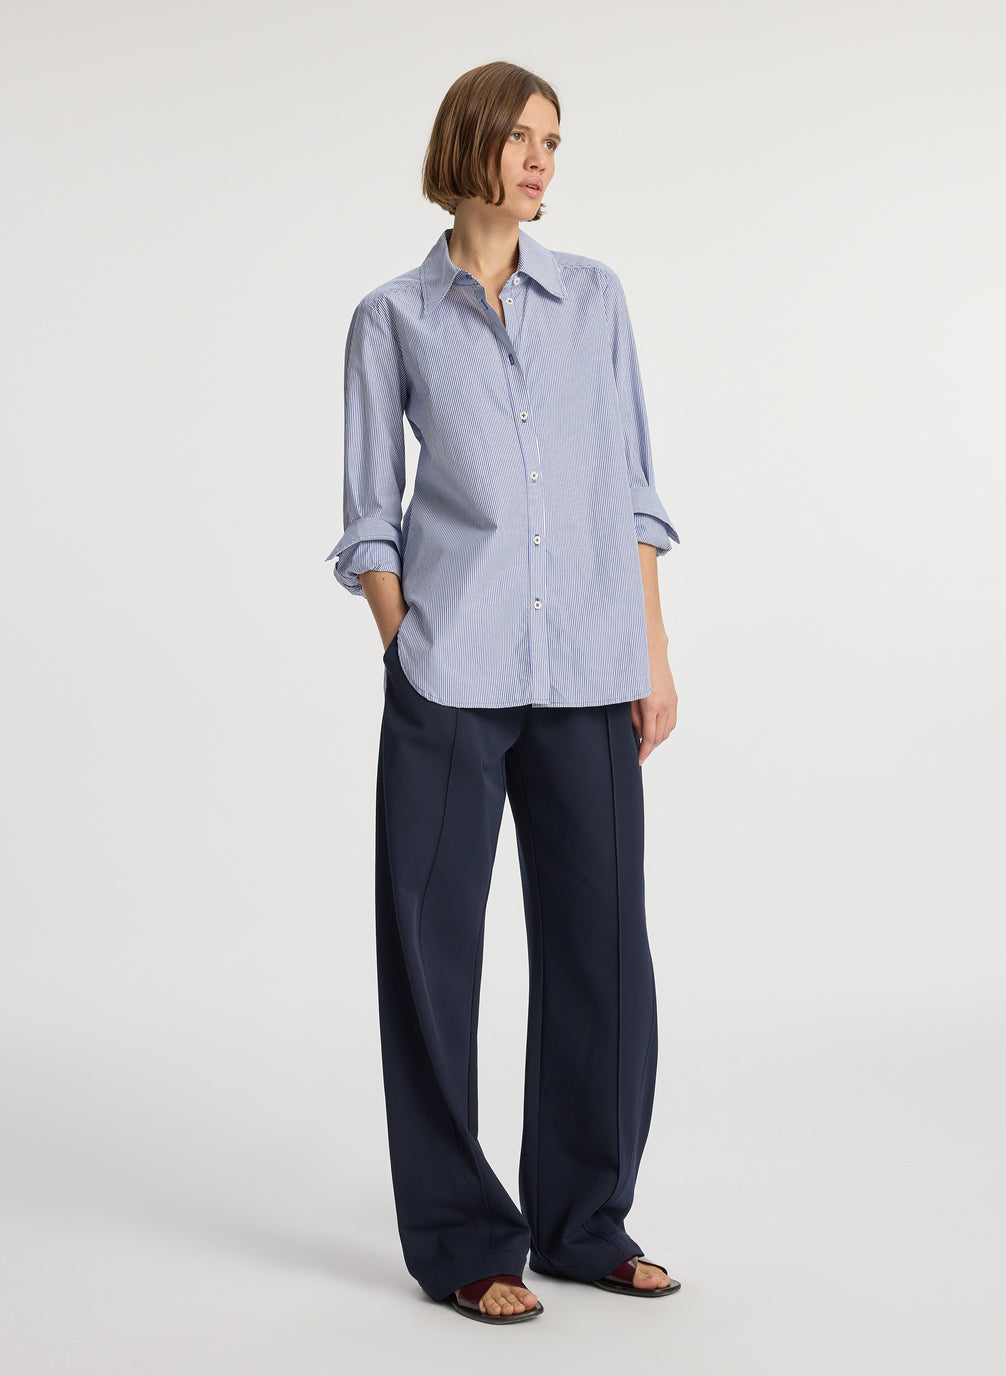 side view of woman wearing blue striped button down collared shirt and navy blue pants